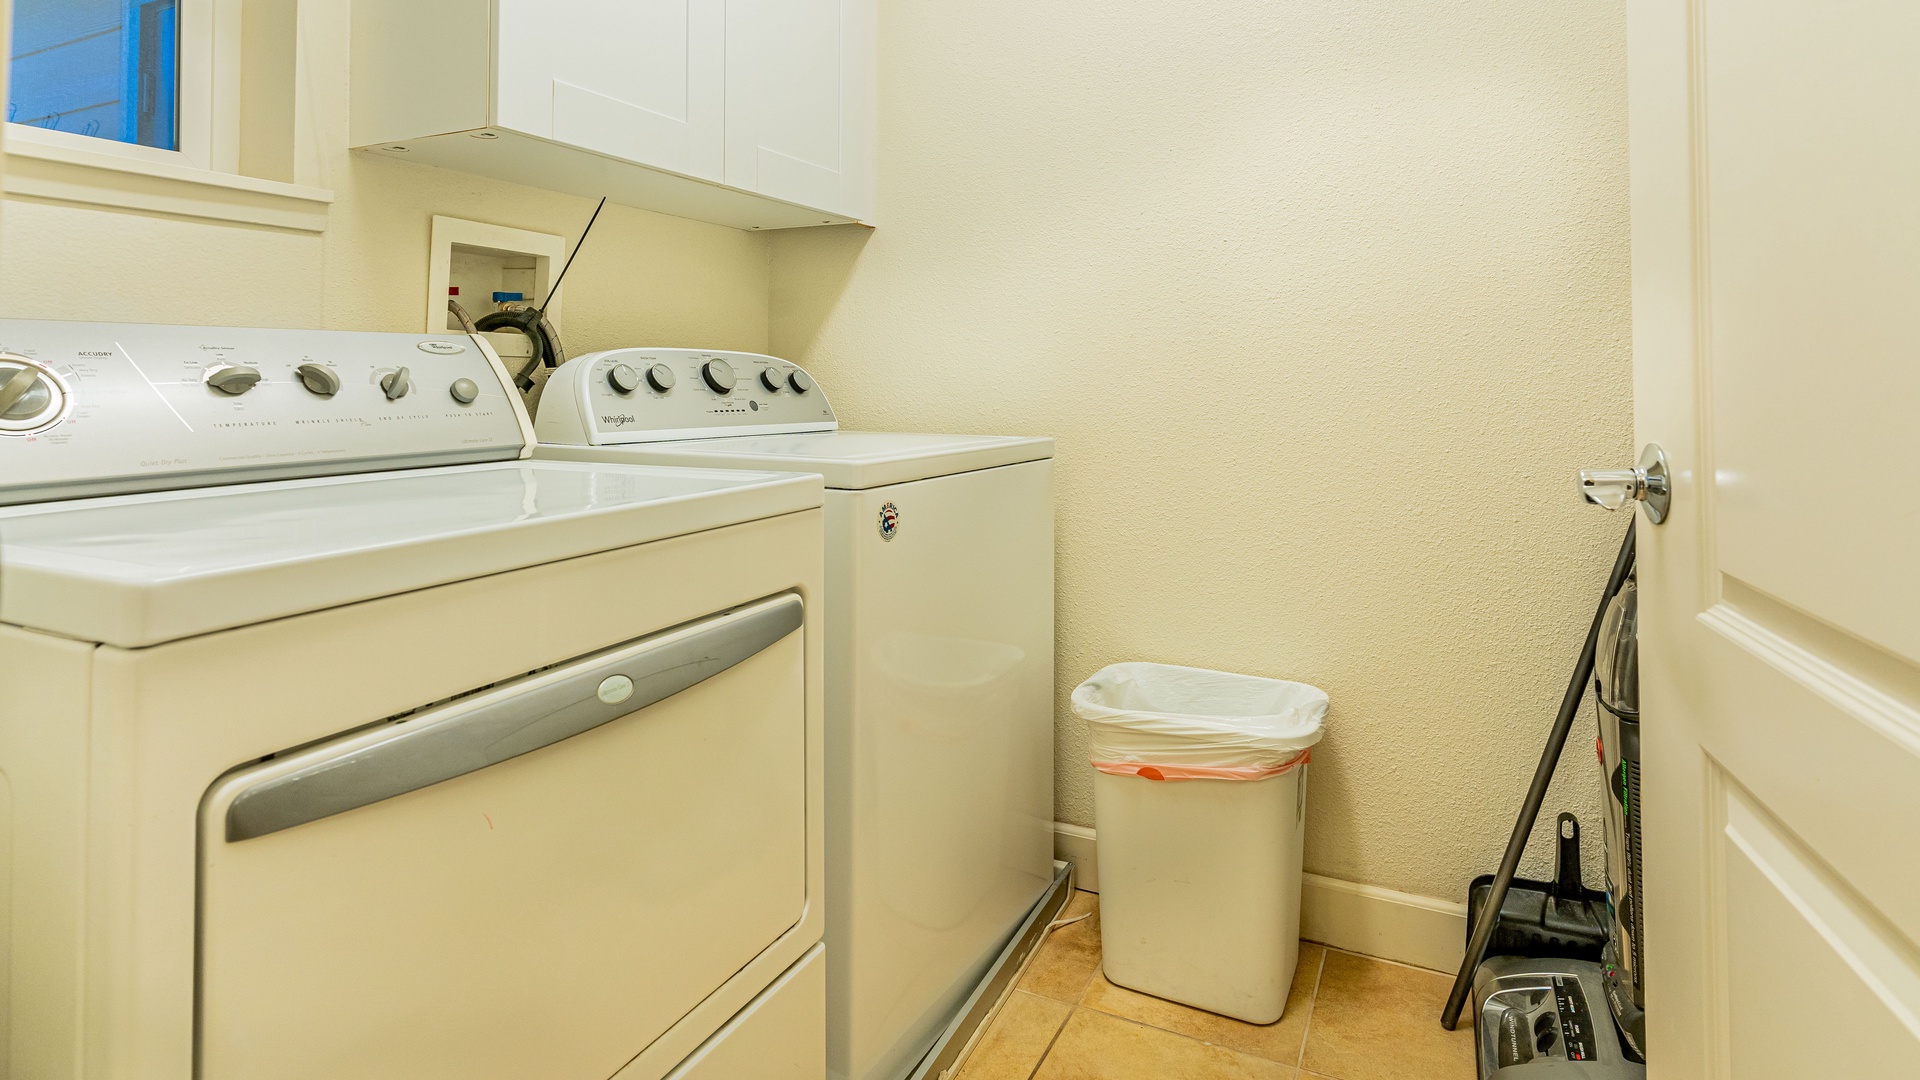 Kapolei Vacation Rentals, Ko Olina Kai 1033C - The laundry room with a washer, dryer and cabinet space.